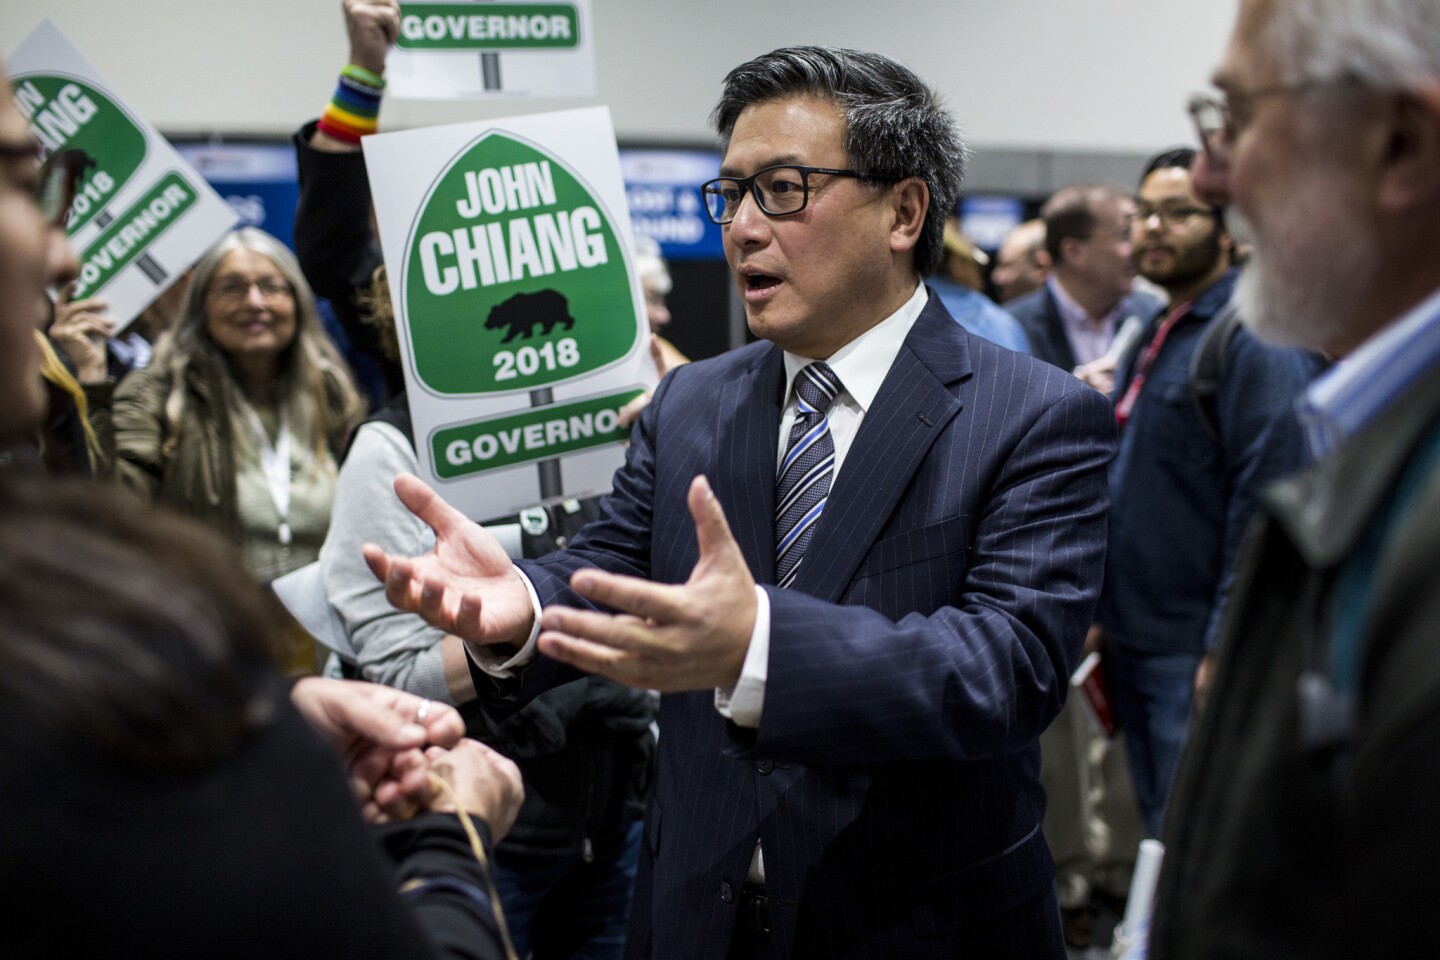 Democratic gubernatorial candidate and current state Treasurer John Chiang greets supporters during the California Democratic Convention.